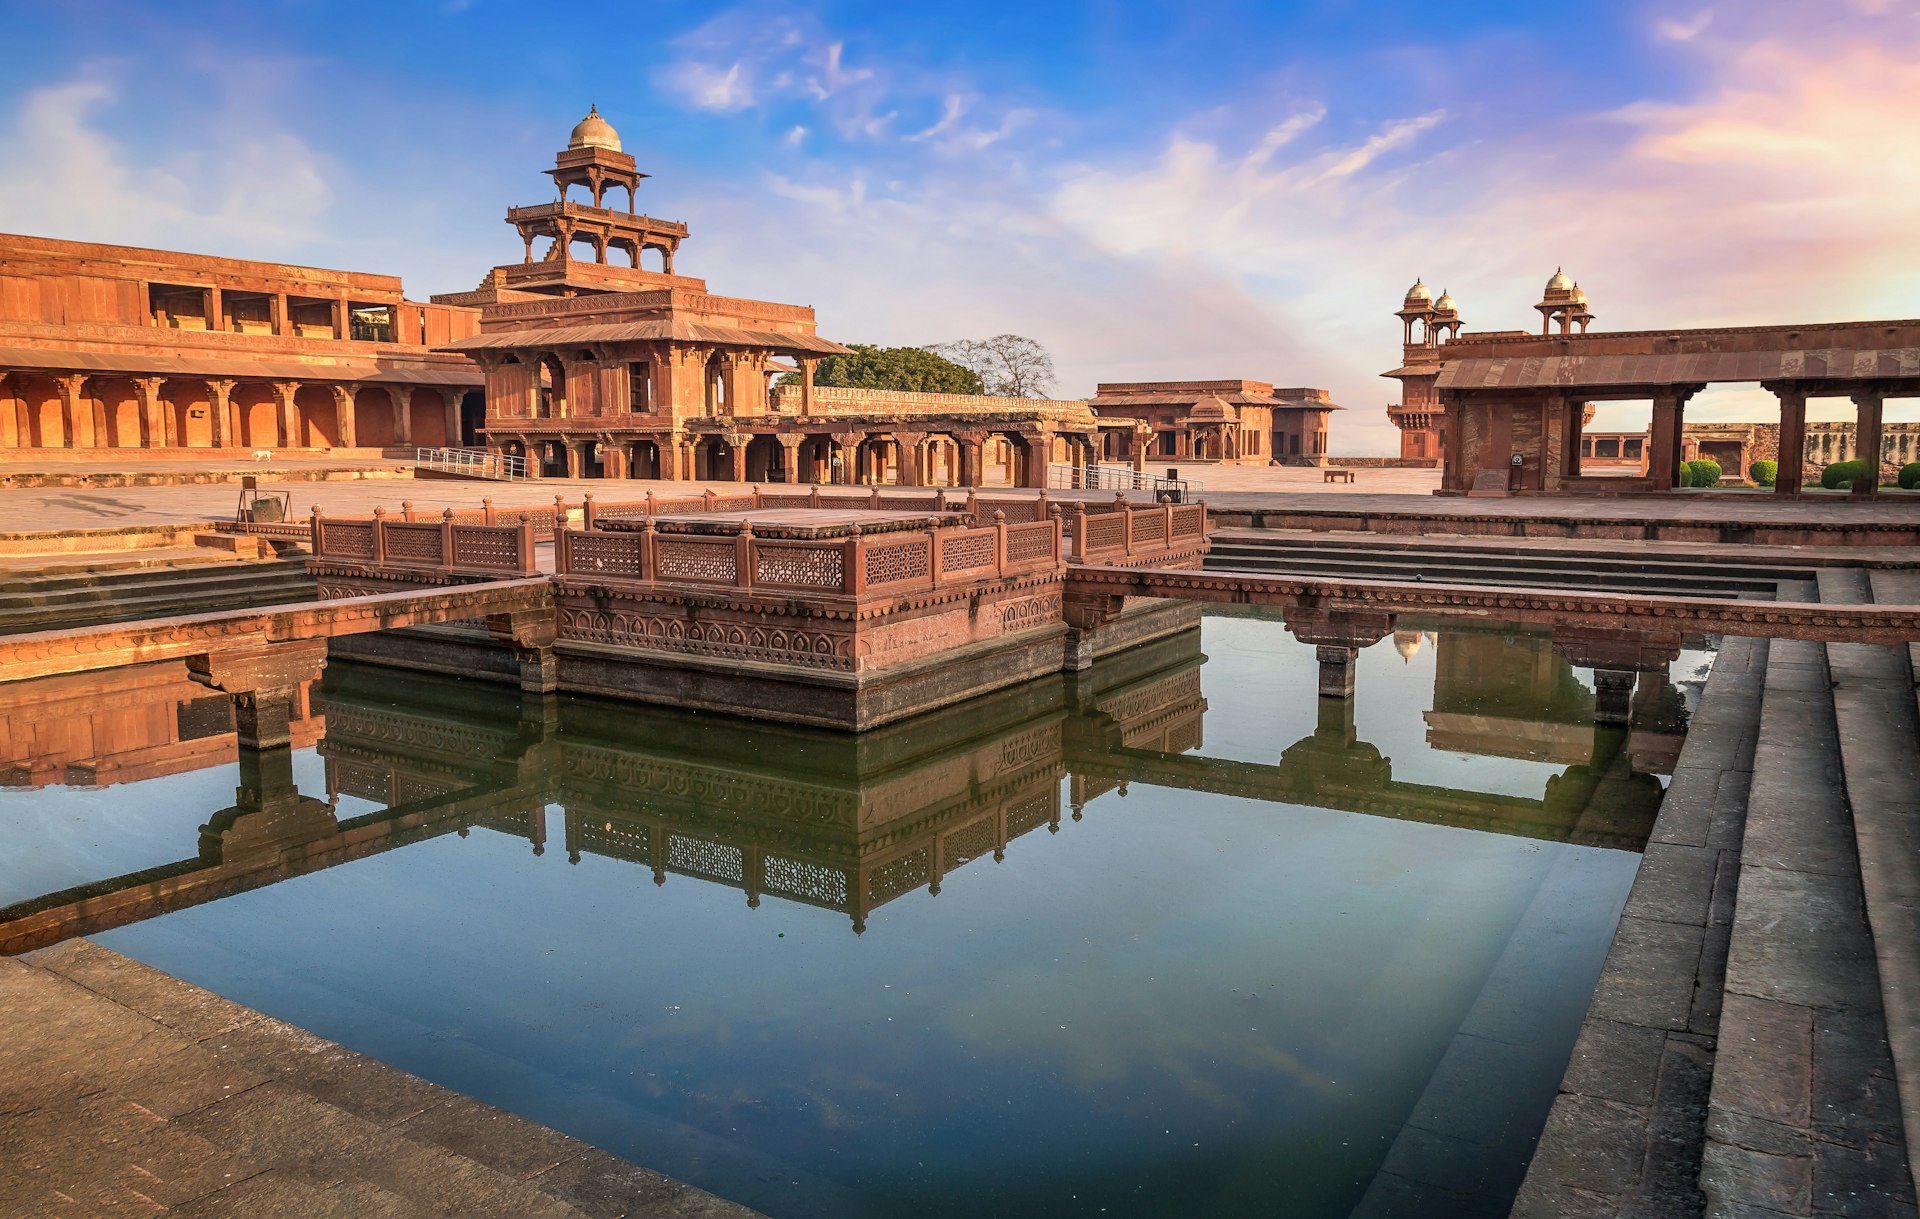 A view of the centre of Fatehpur Sikri, an abandonded Mughal city. The grand sandstone structures are surrounded by a small moat. 